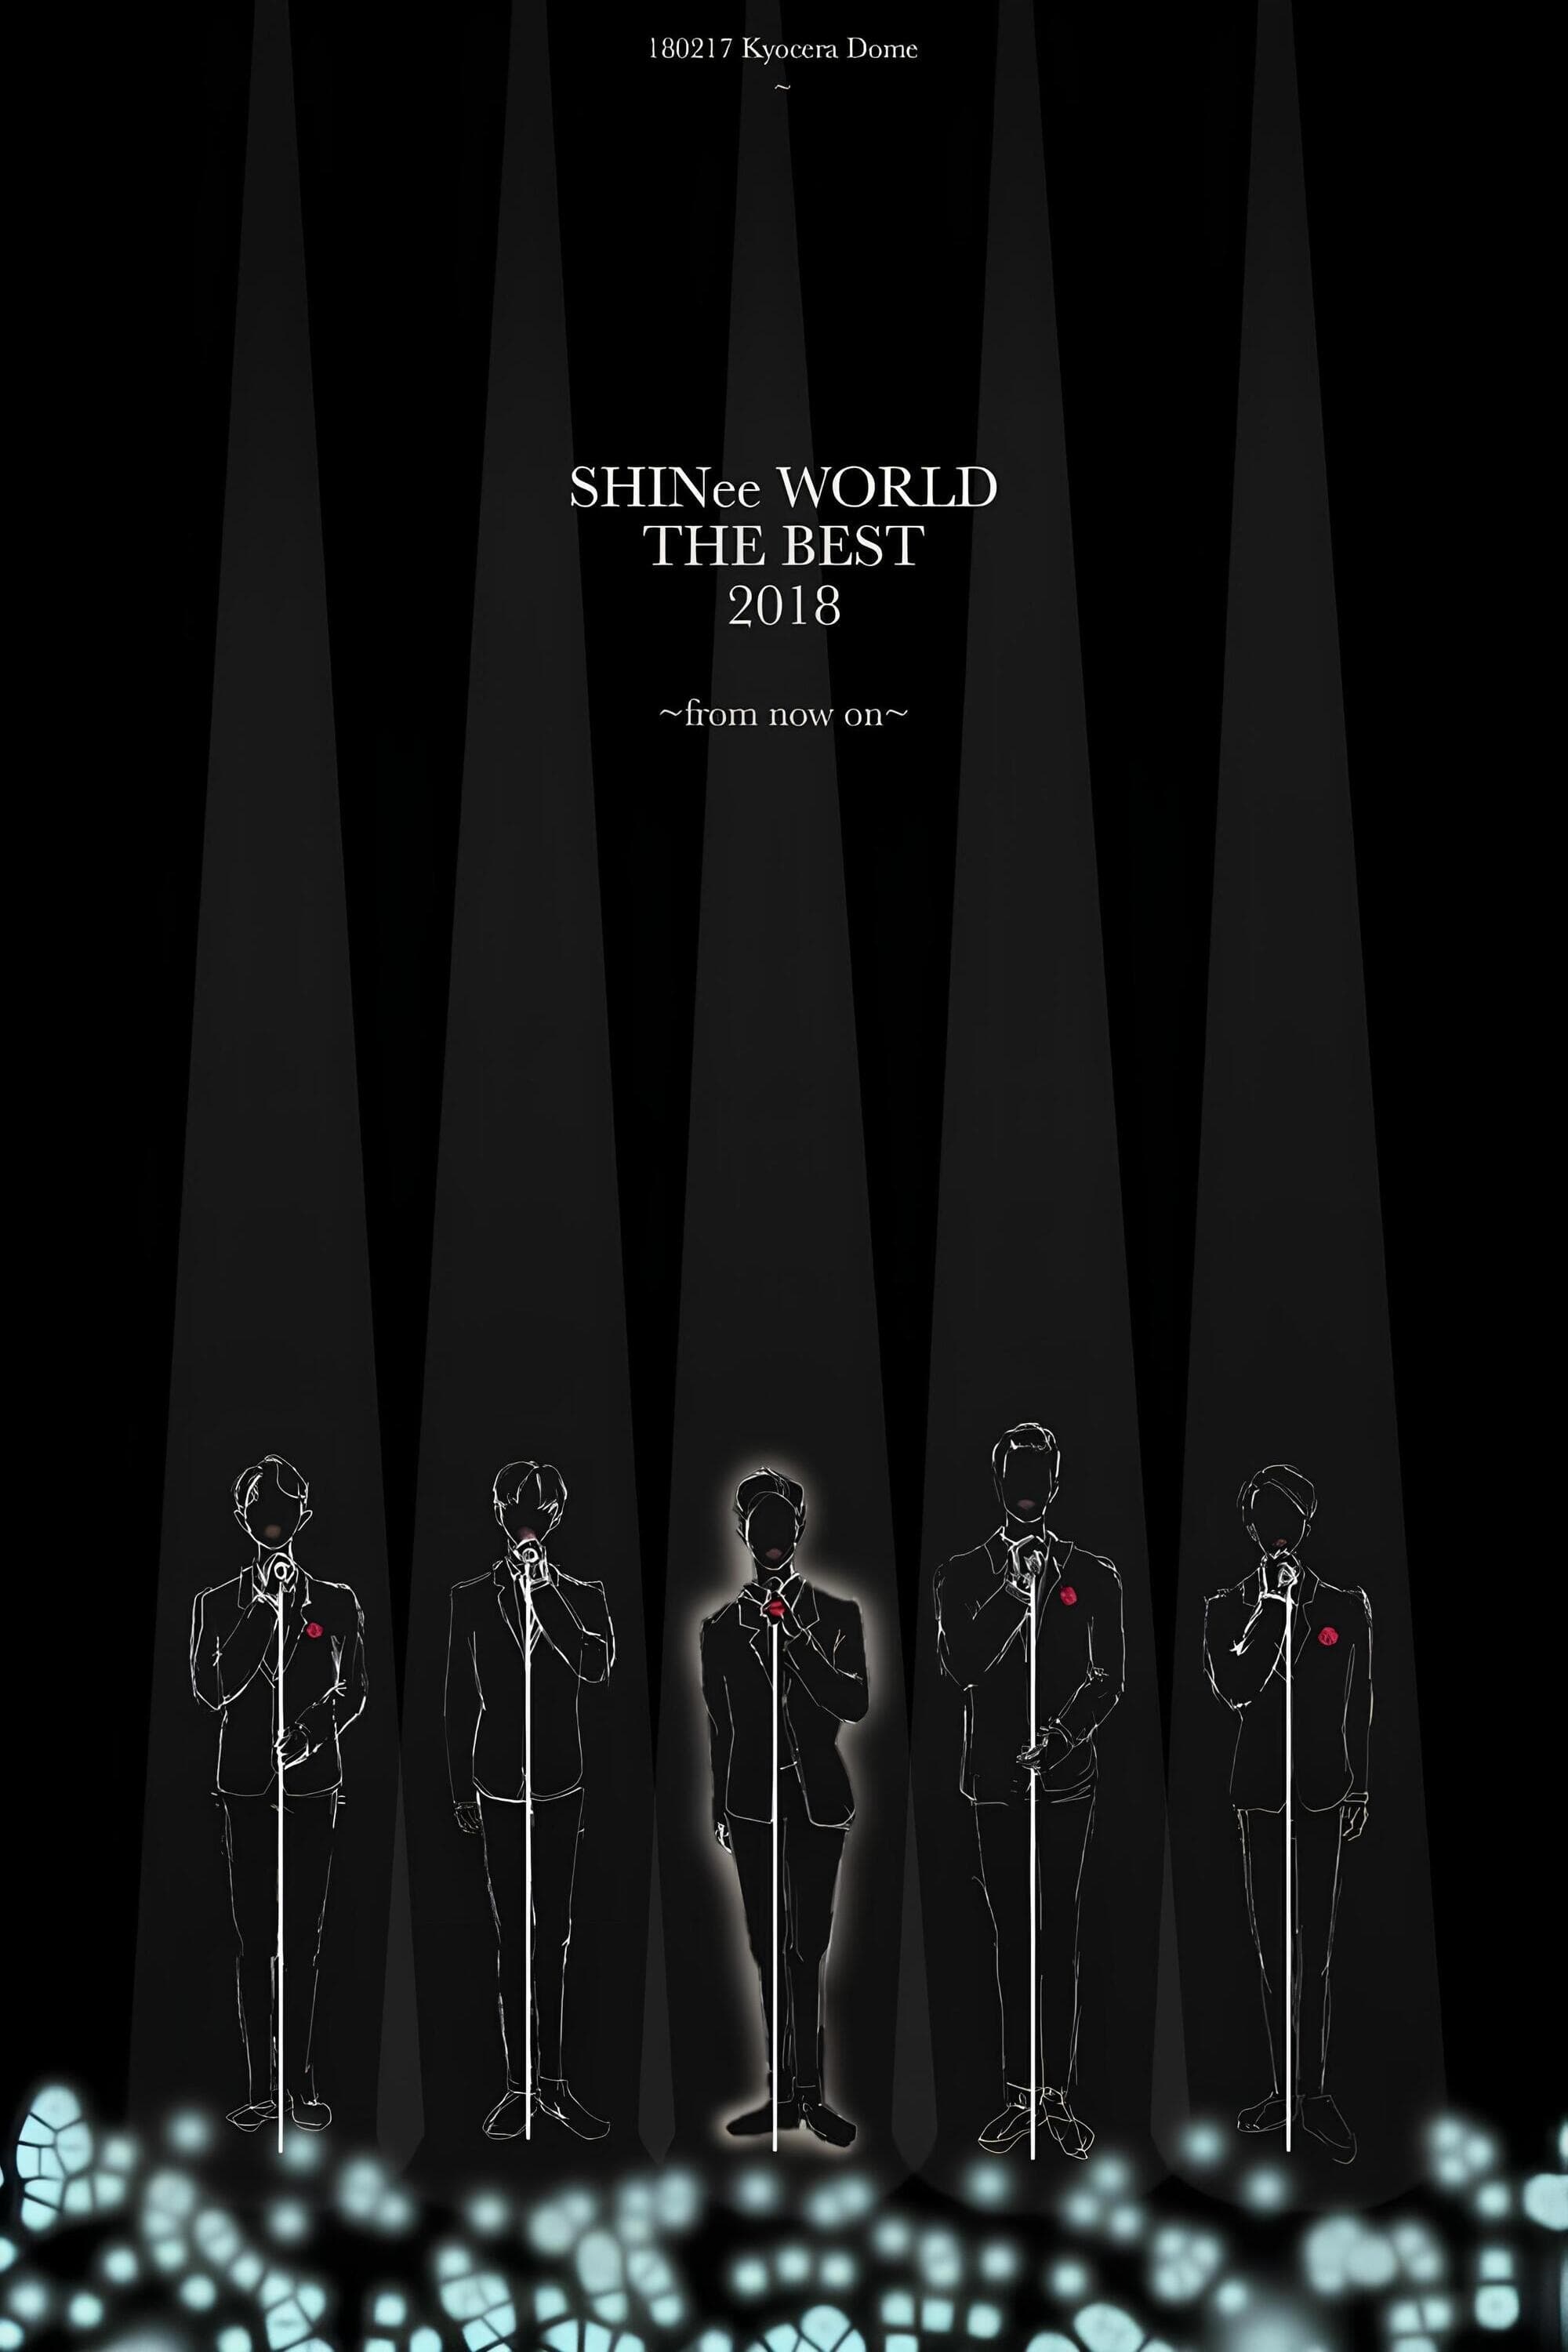 SHINee WORLD THE BEST 2018～FROM NOW ON～